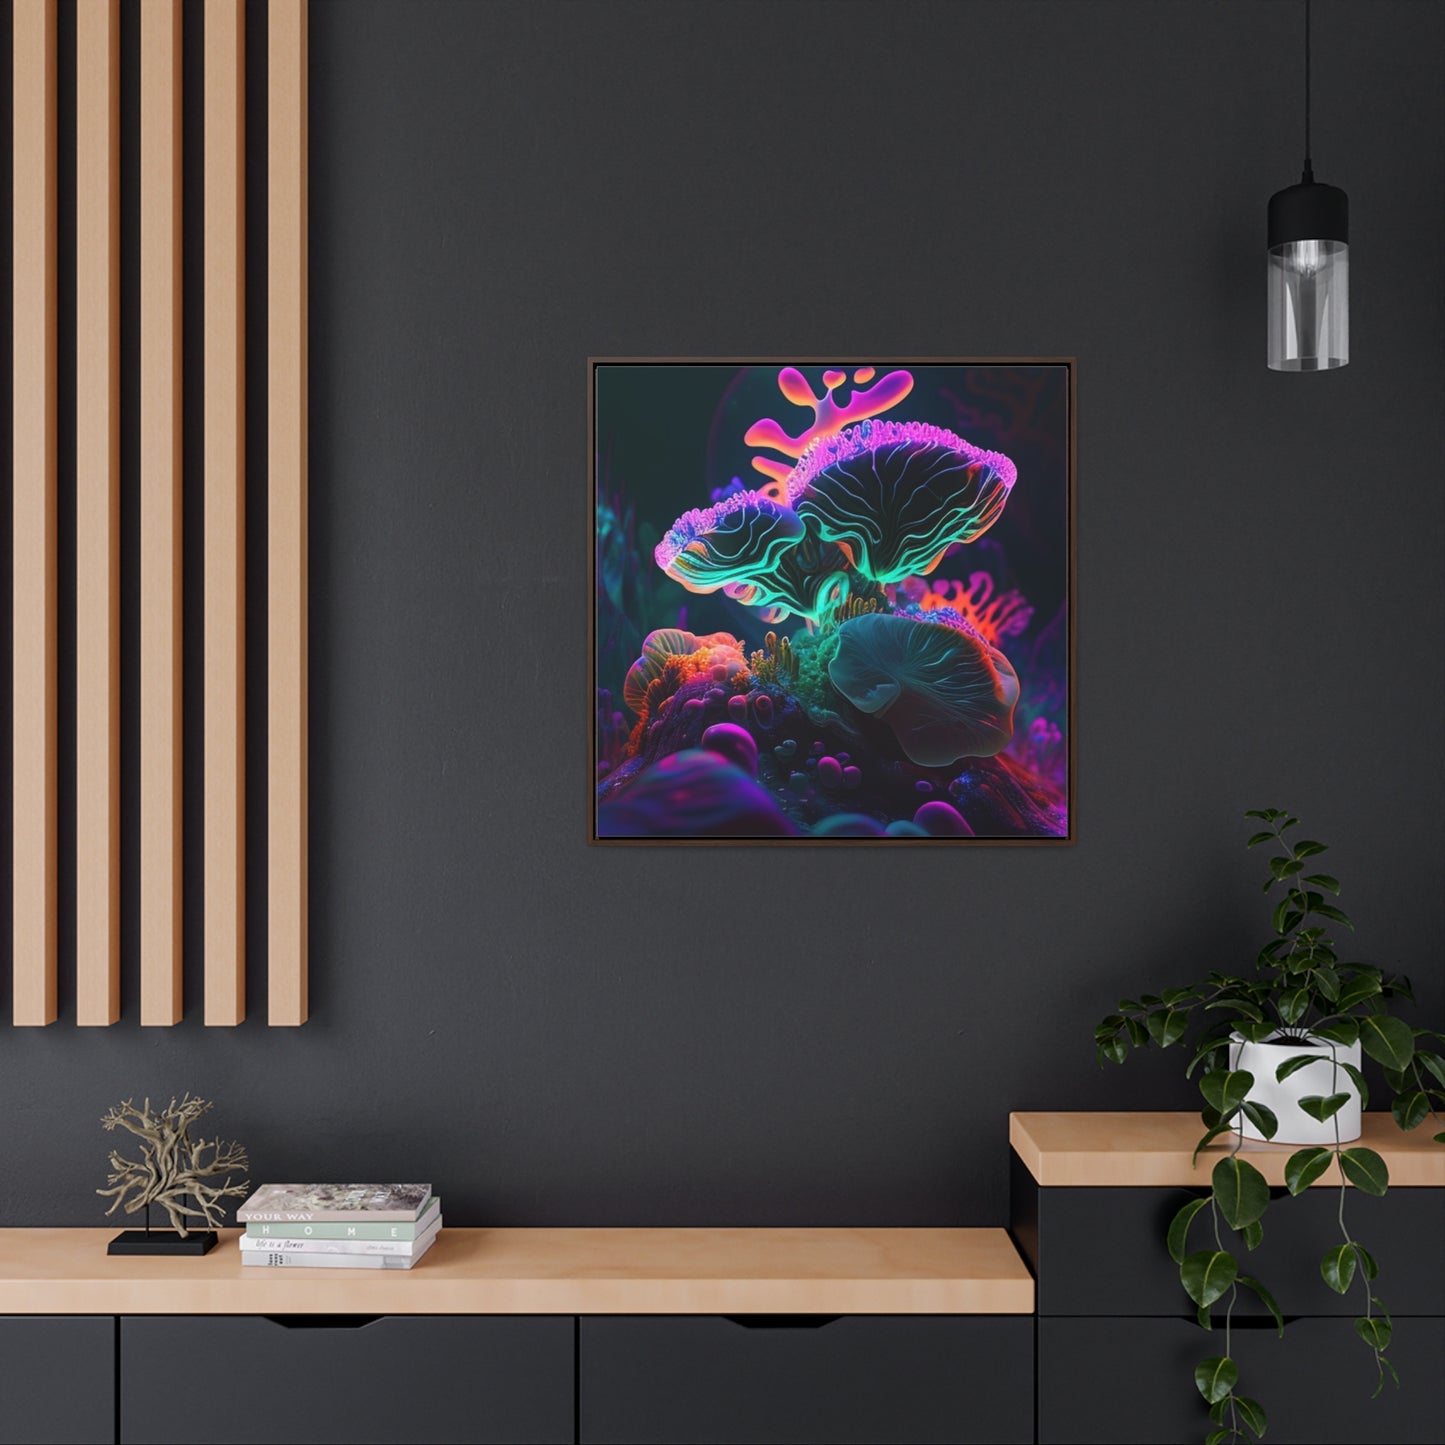 Gallery Canvas Wraps, Square Frame Macro Coral Reef 4